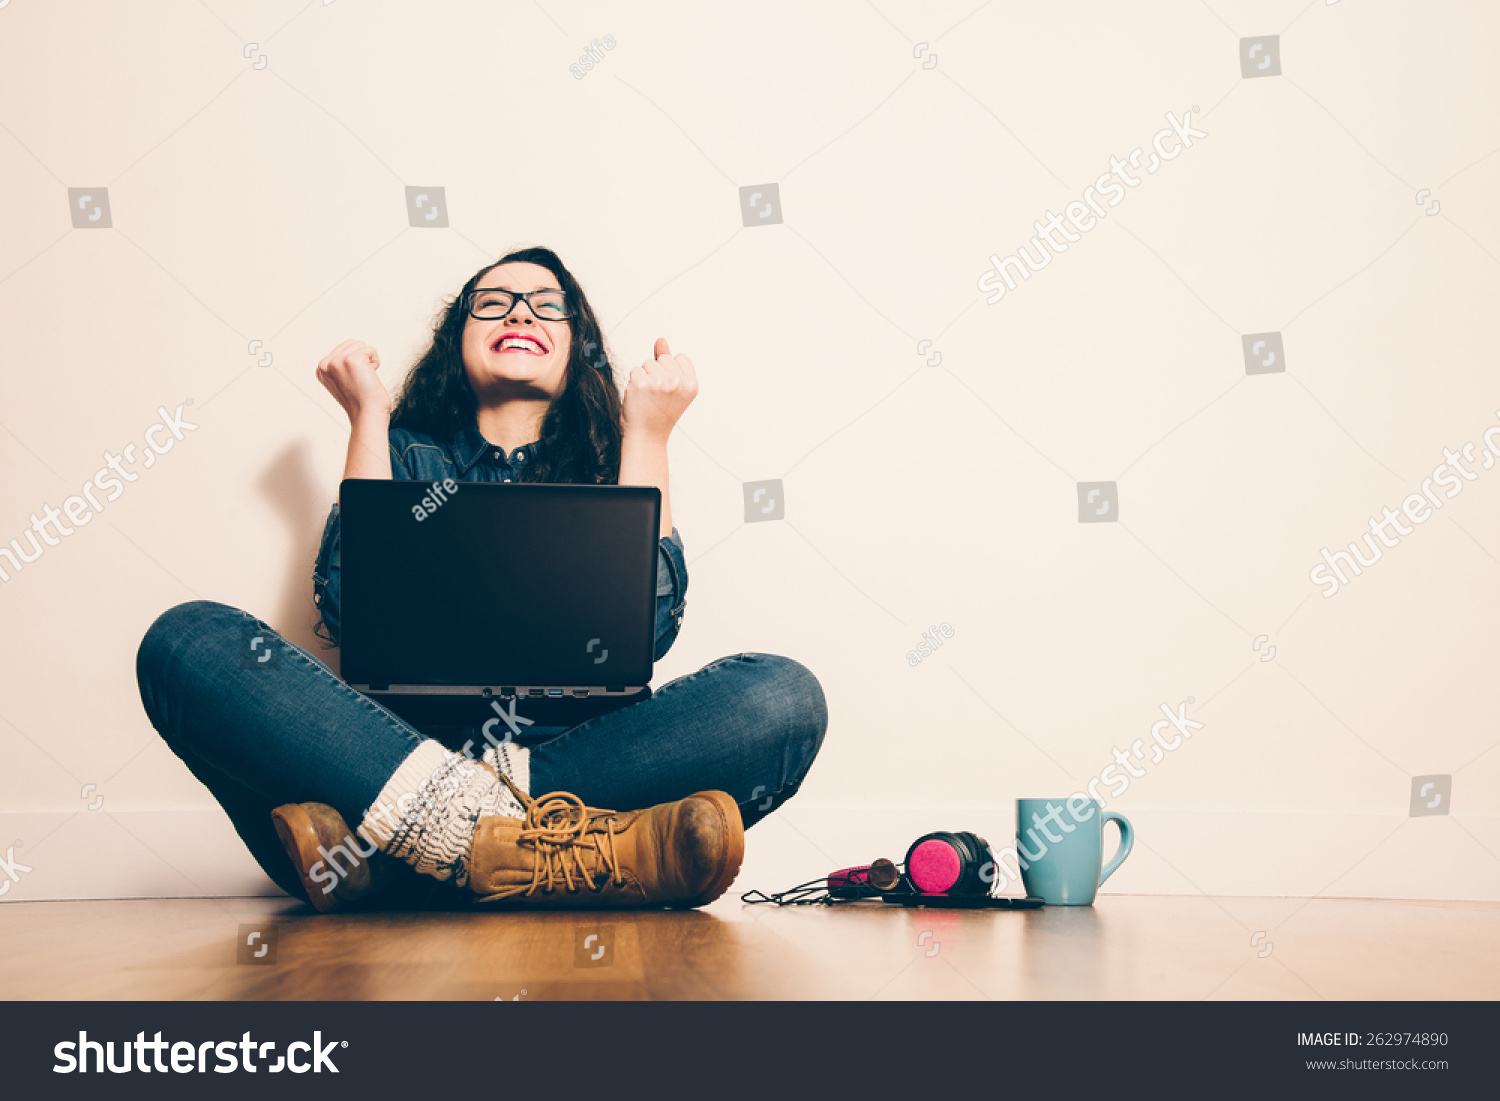 stock-photo-girl-sitting-on-the-floor-with-a-laptop-raising-his-arms-with-a-look-of-success-262974890